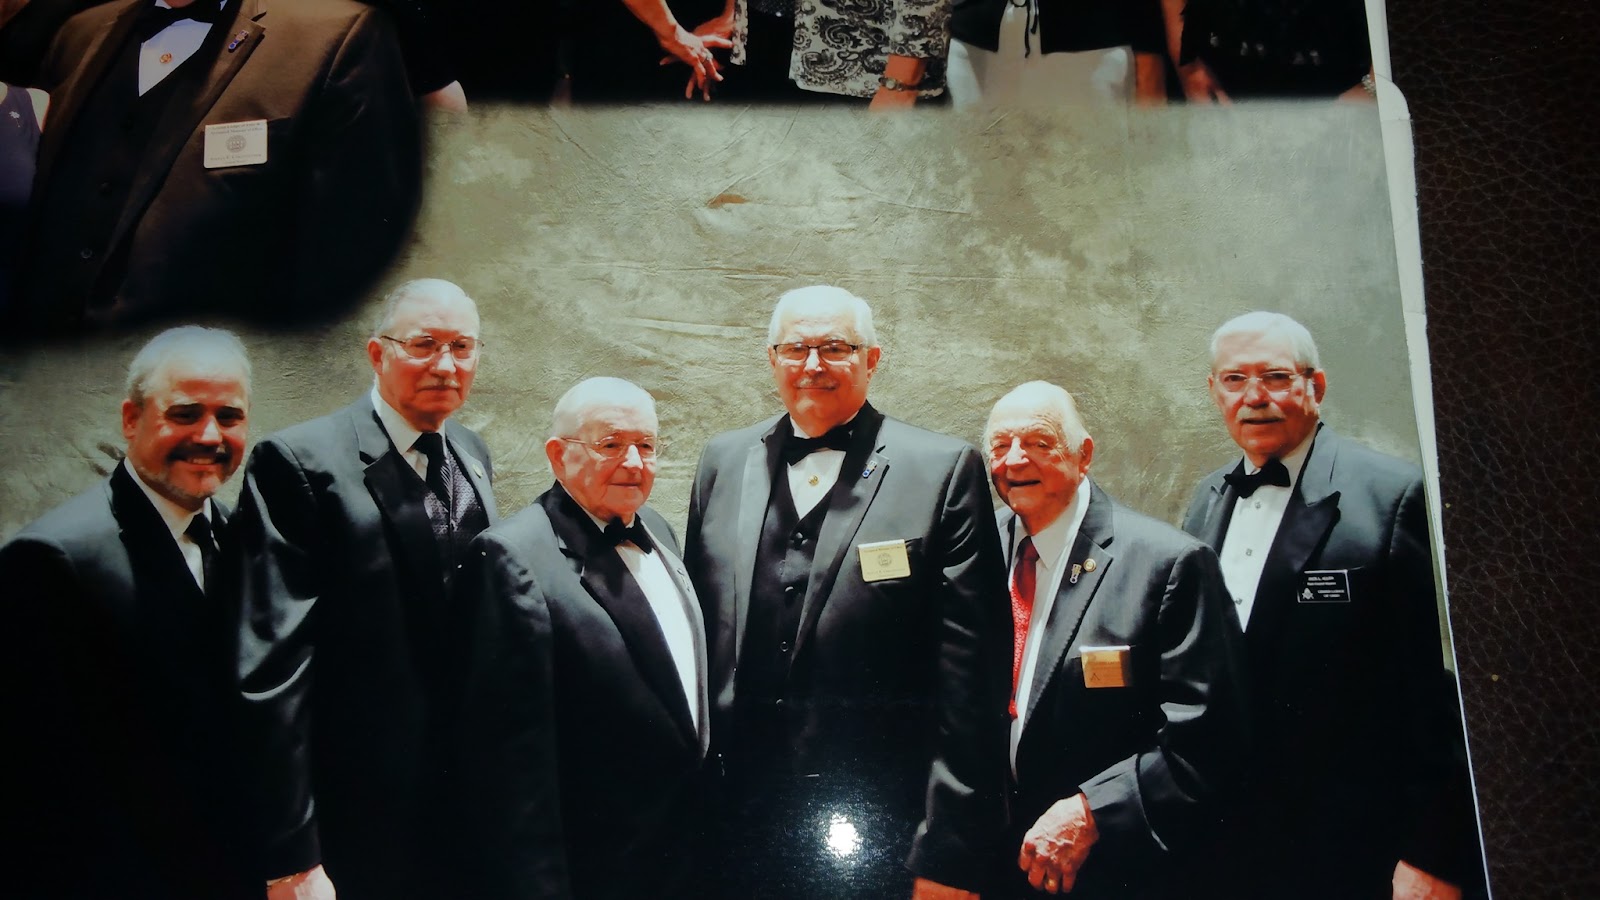 Image of Bro. Cokonougher and Past Grand Masters.